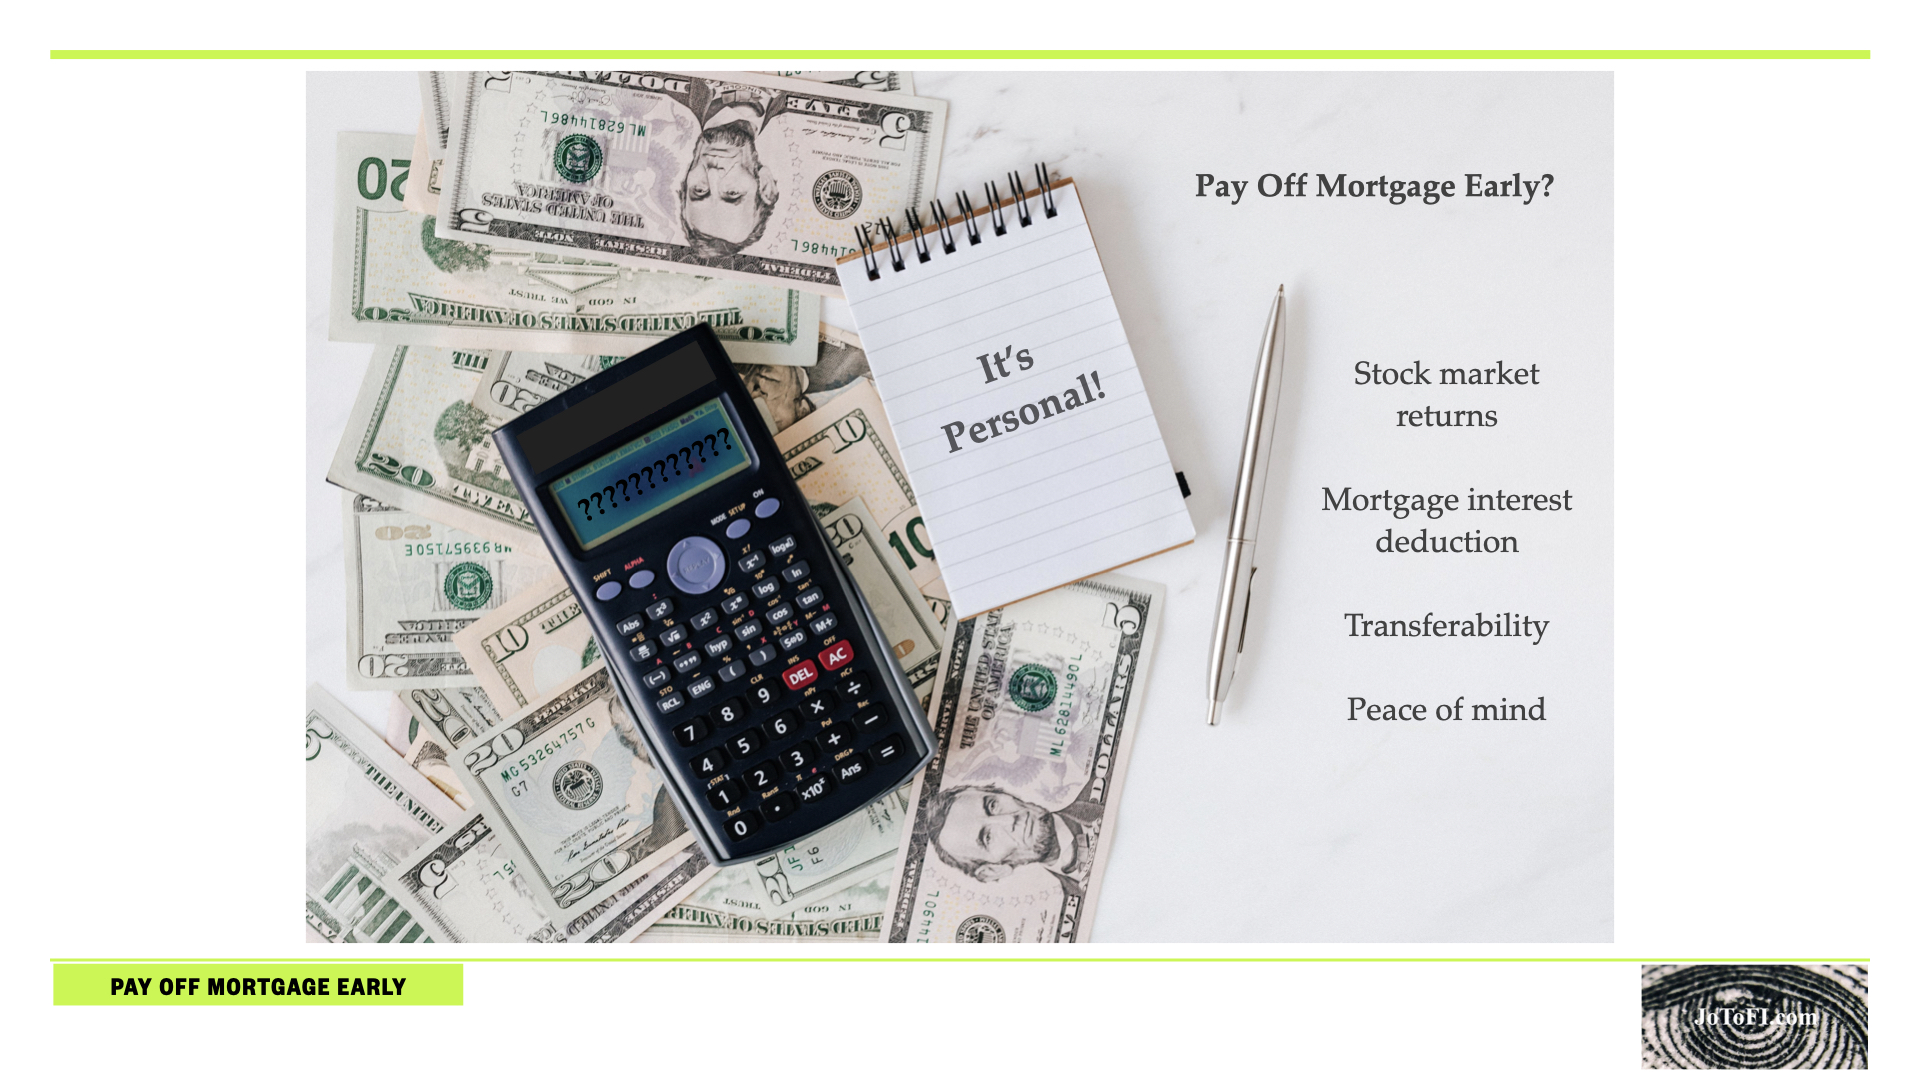 Pay off mortgage early